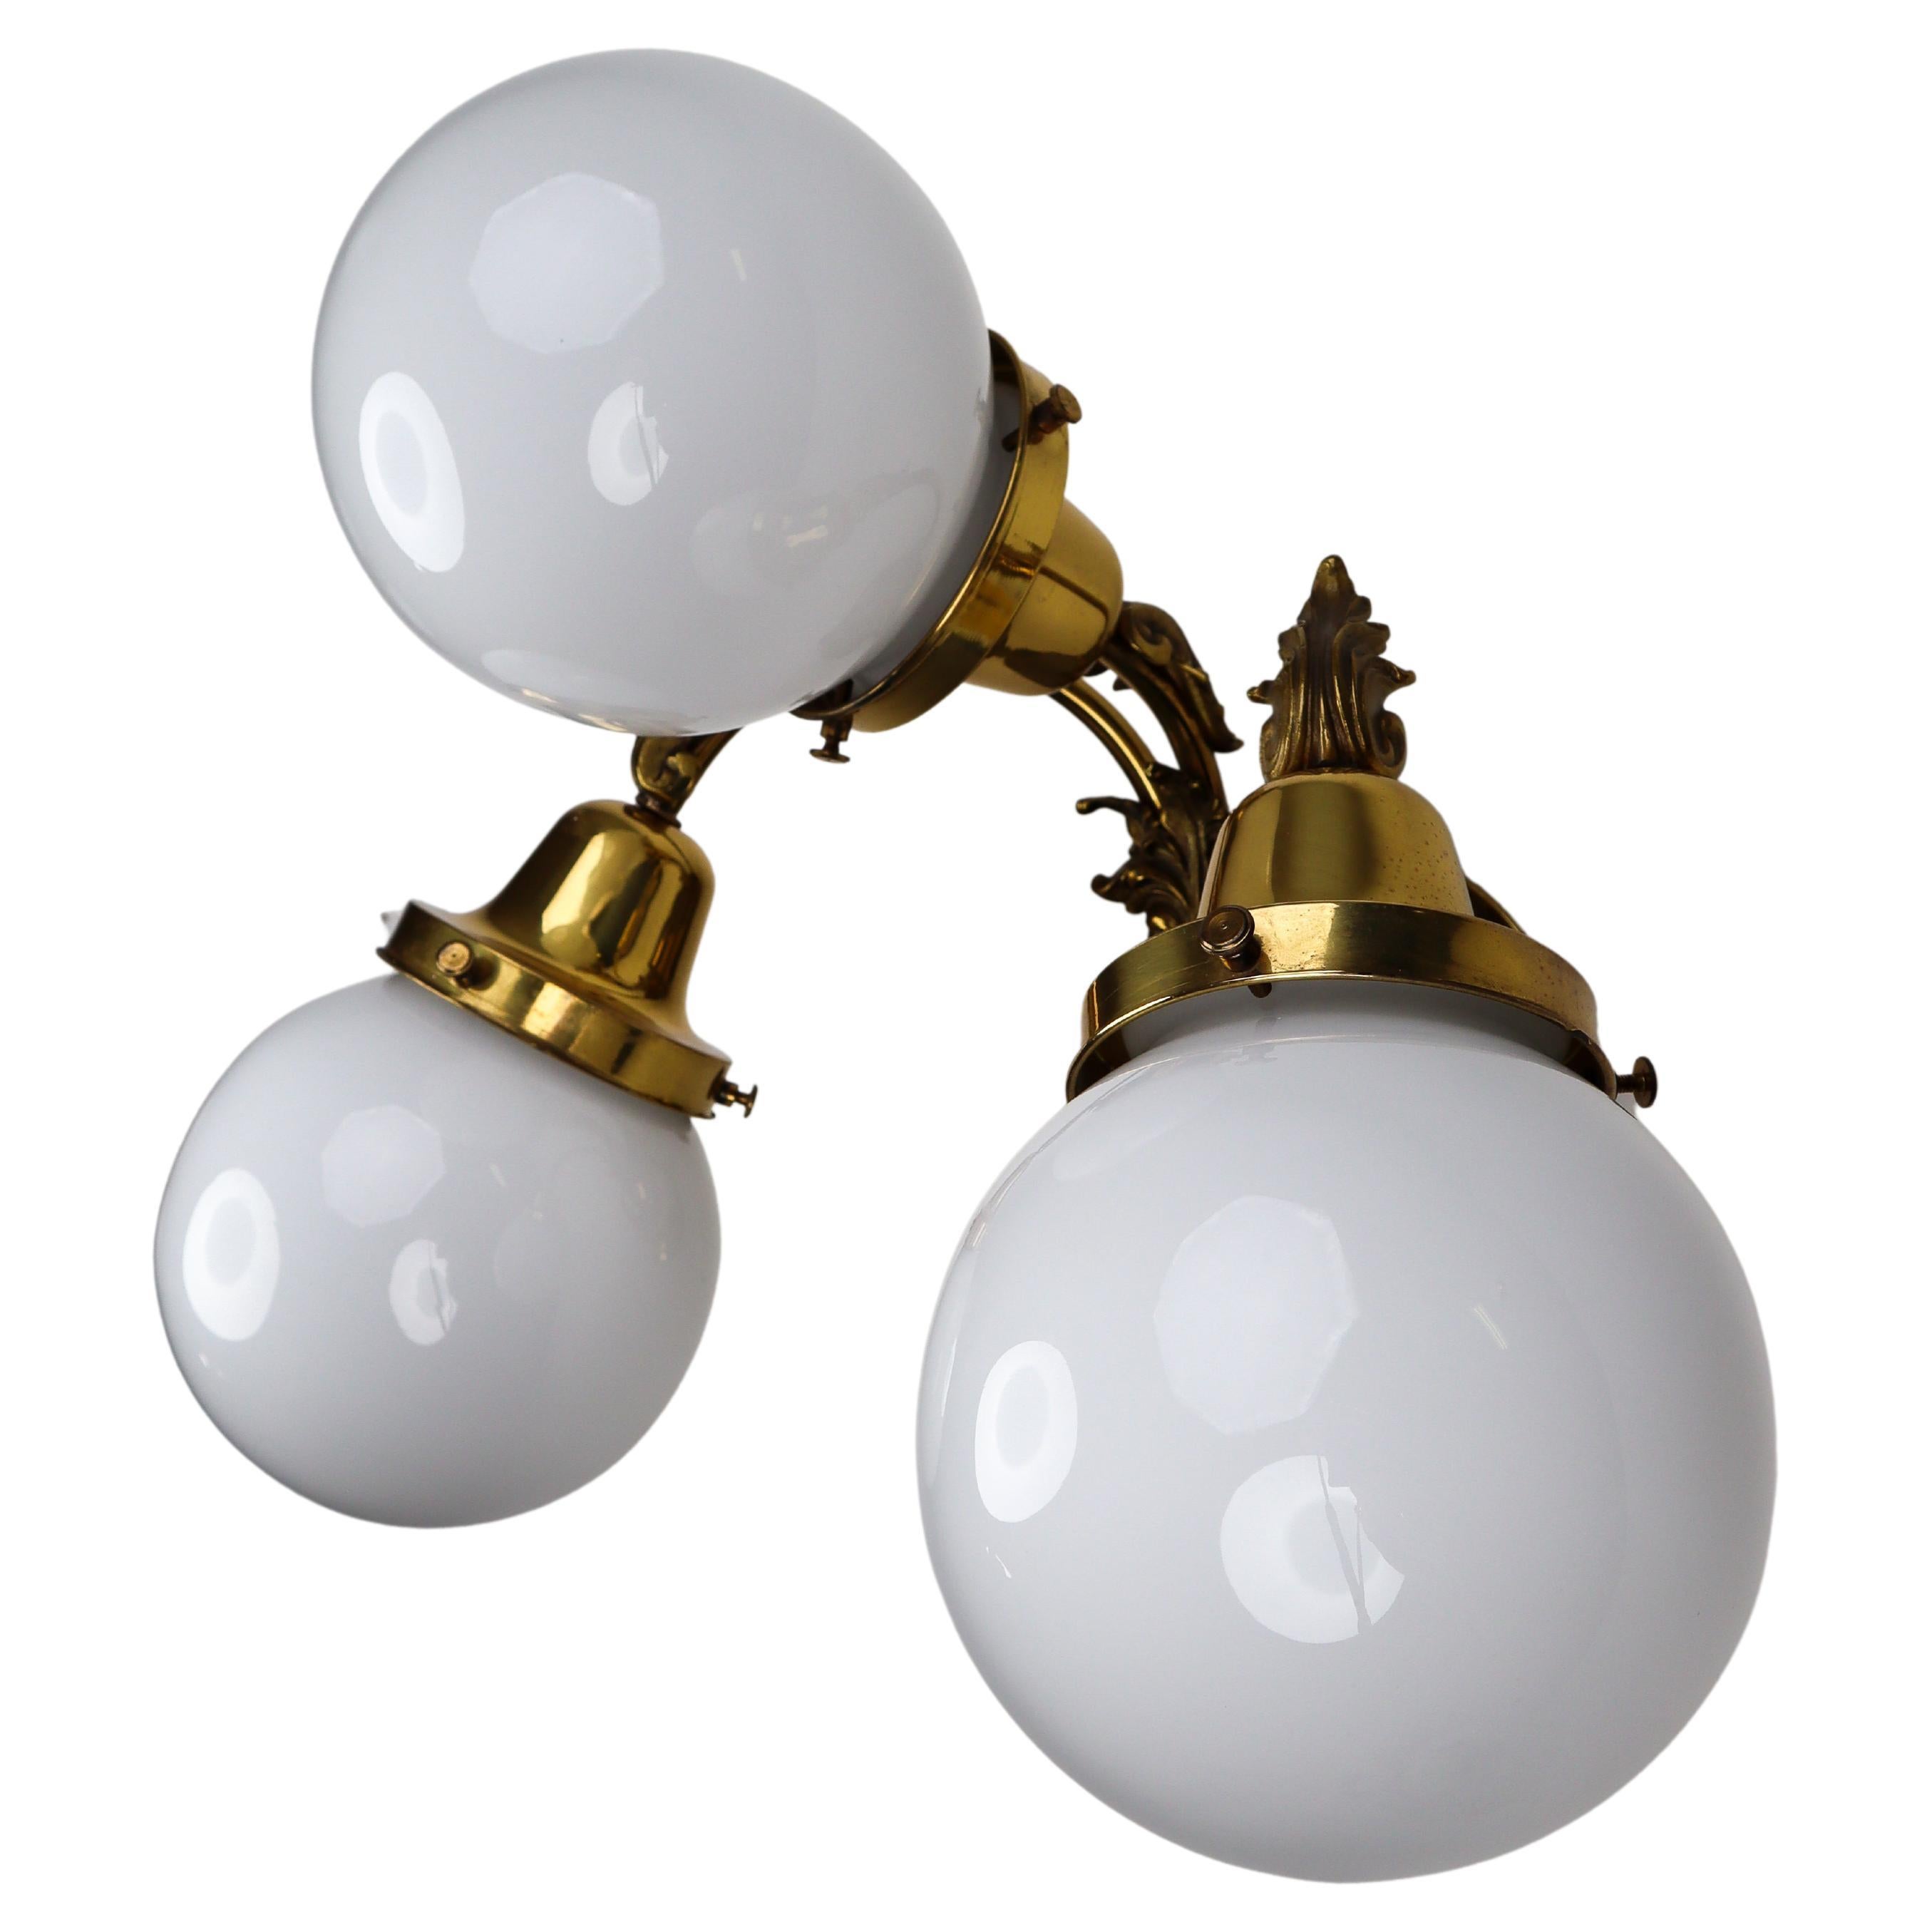 Monumental Brass Wall Lights with Opaline Glass Globes, National Gallery Praque